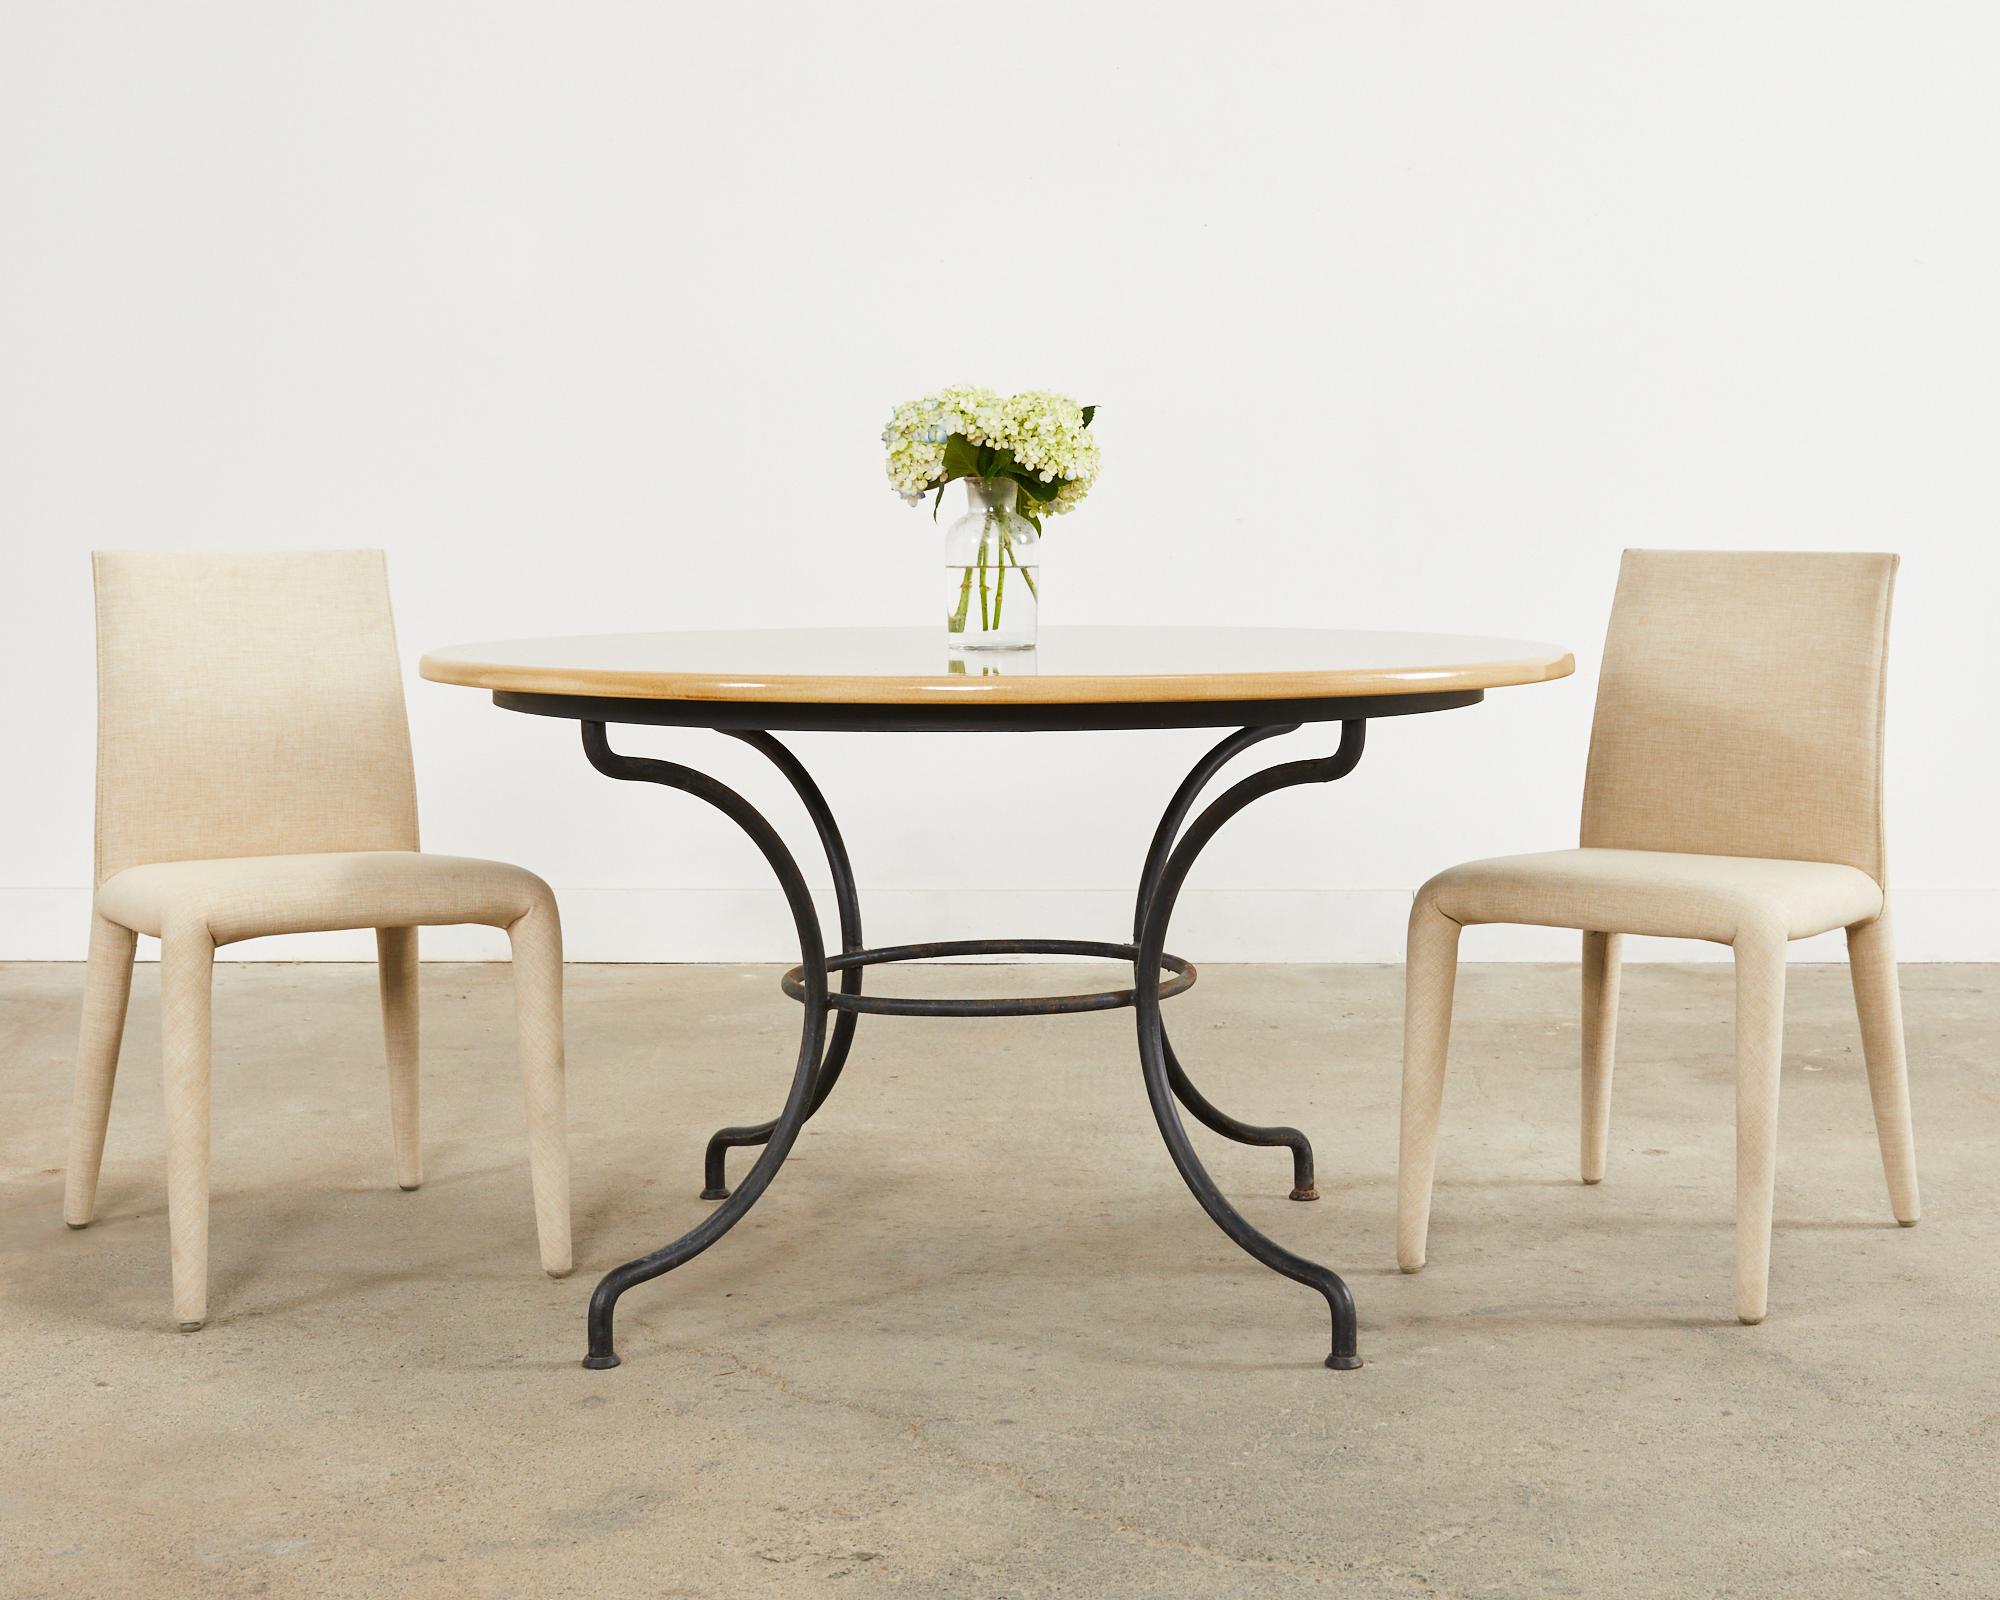 Stylish set of four Italian dining chairs designed by Mario Bellini for B and B Italia. The chairs feature a molded steel and foam frame with a removable fabric cover that fits like a fine Italian suit. The fabric is tightly woven in a neutral beige